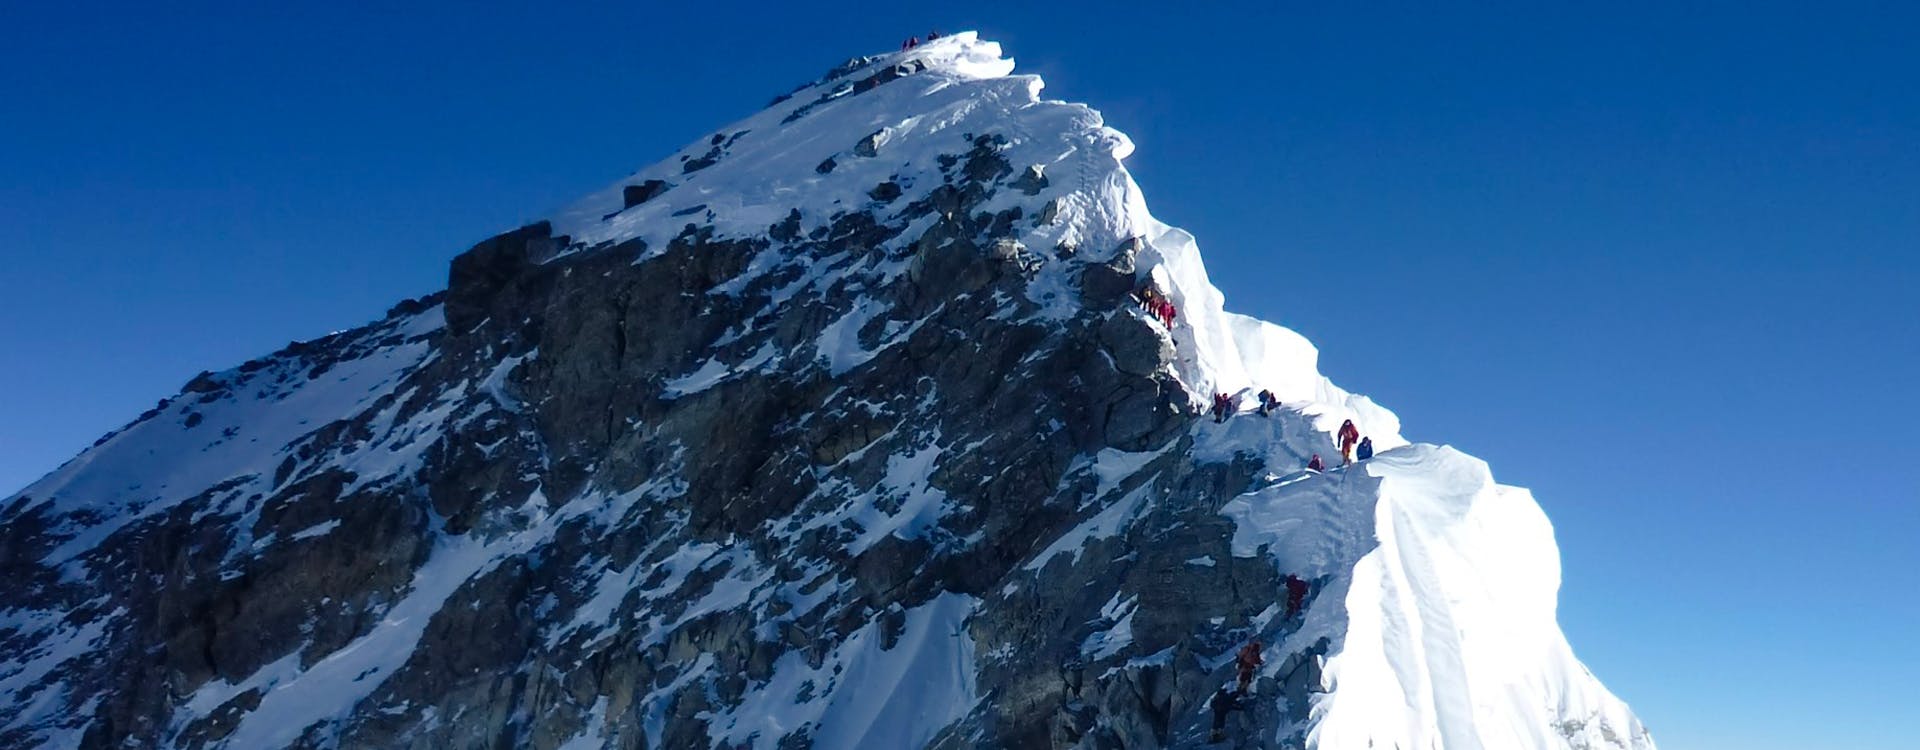 Creating History at Mt Everest